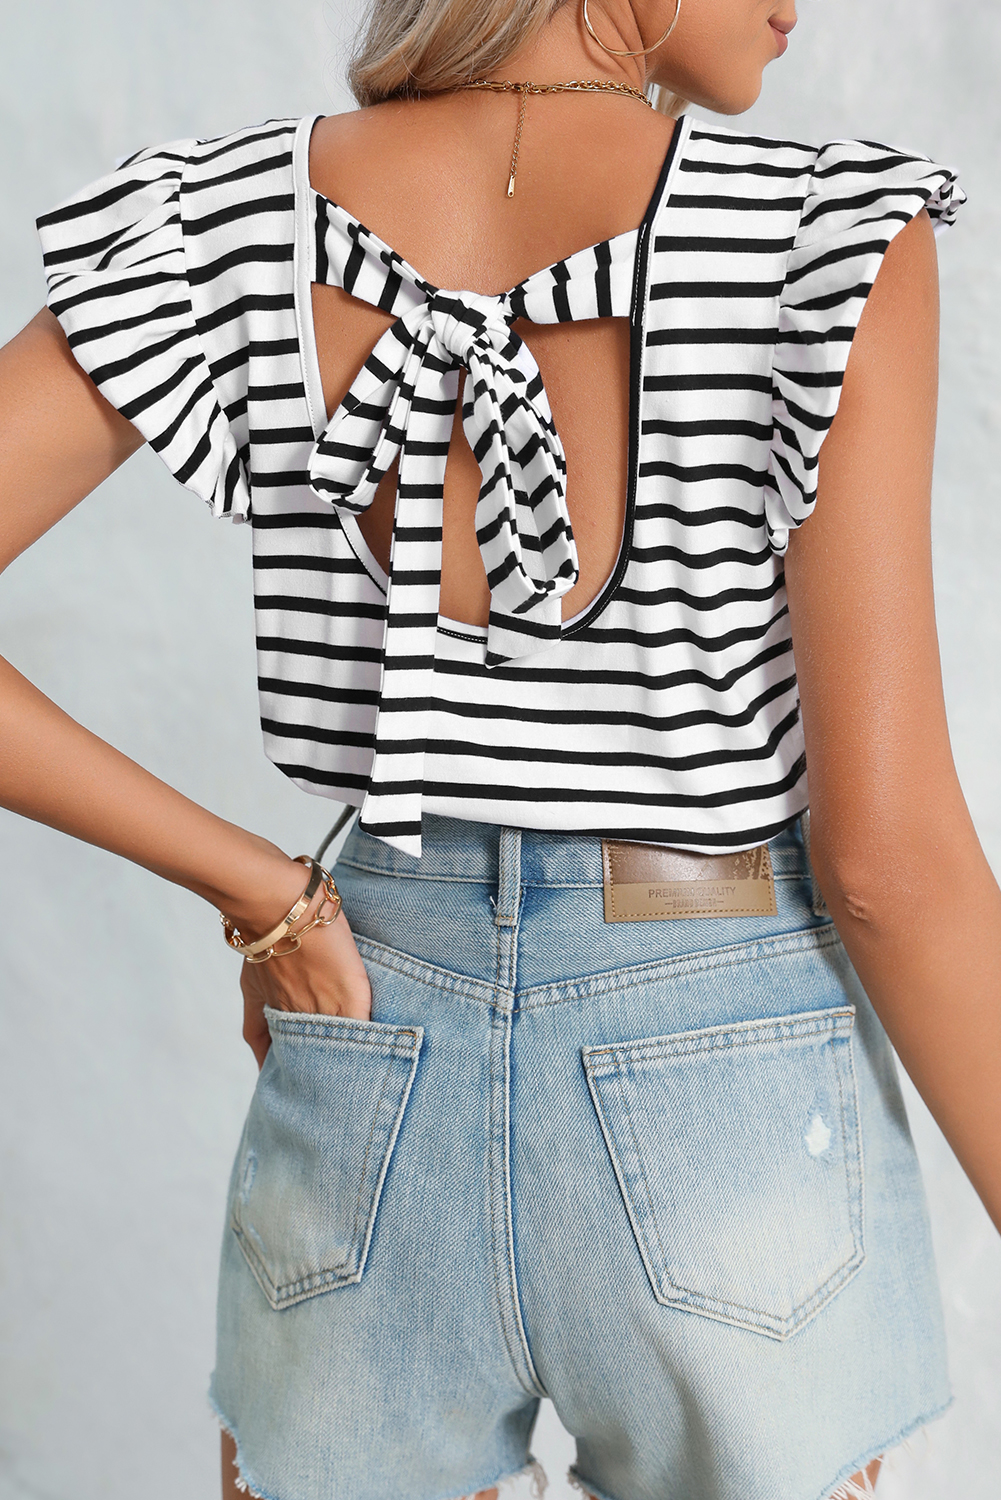 Shewin Wholesale Clothes White Stripe V Neck Knotted Backless Ruffle T SHIRT